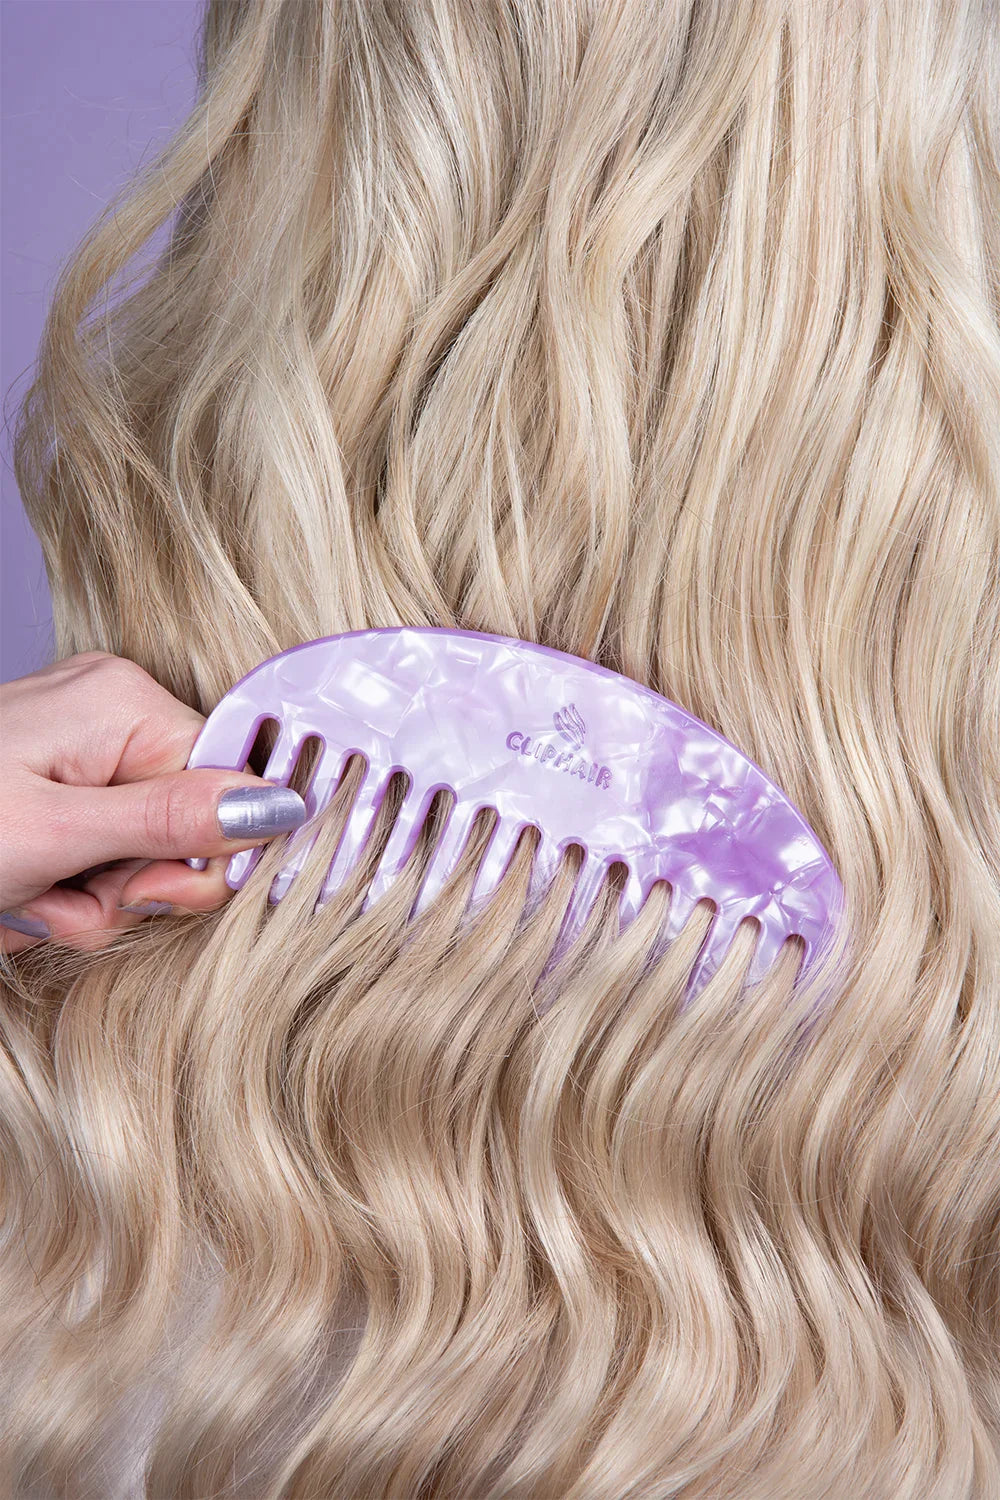 Wave comb in use